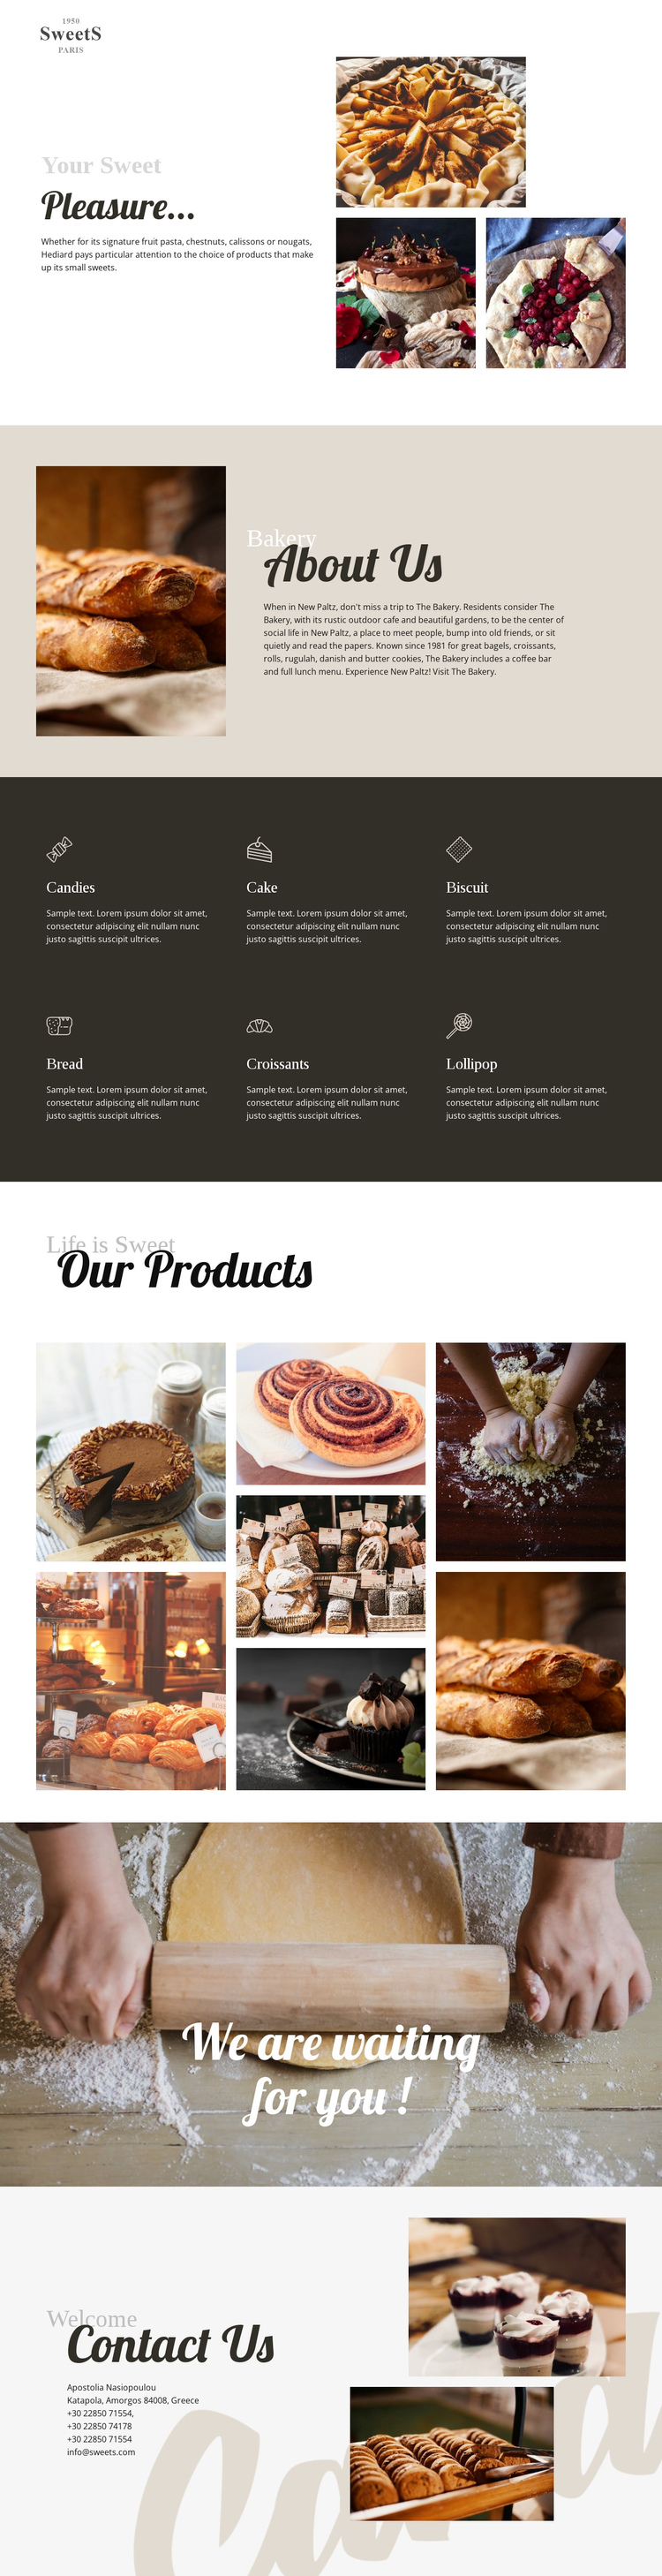 Cakes and baking food Website Builder Software